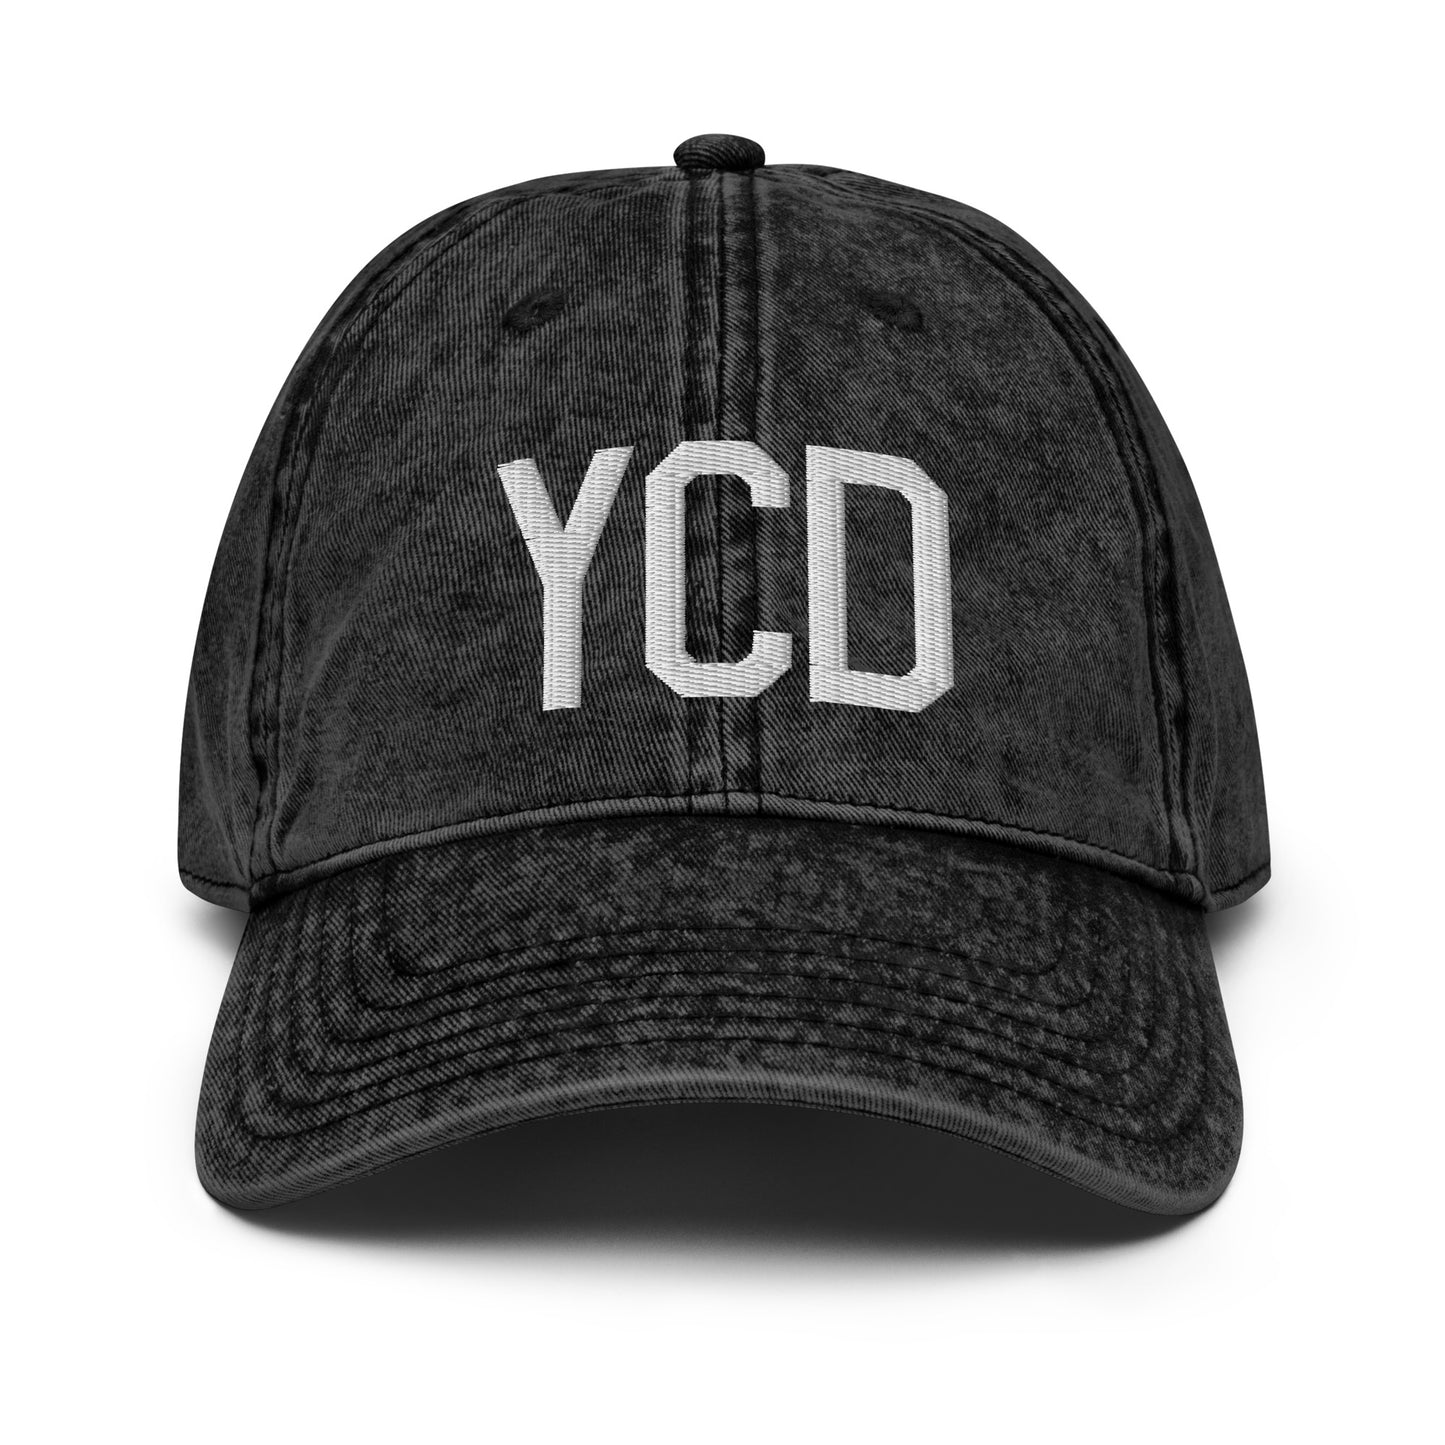 Airport Code Twill Cap - White • YCD Nanaimo • YHM Designs - Image 14